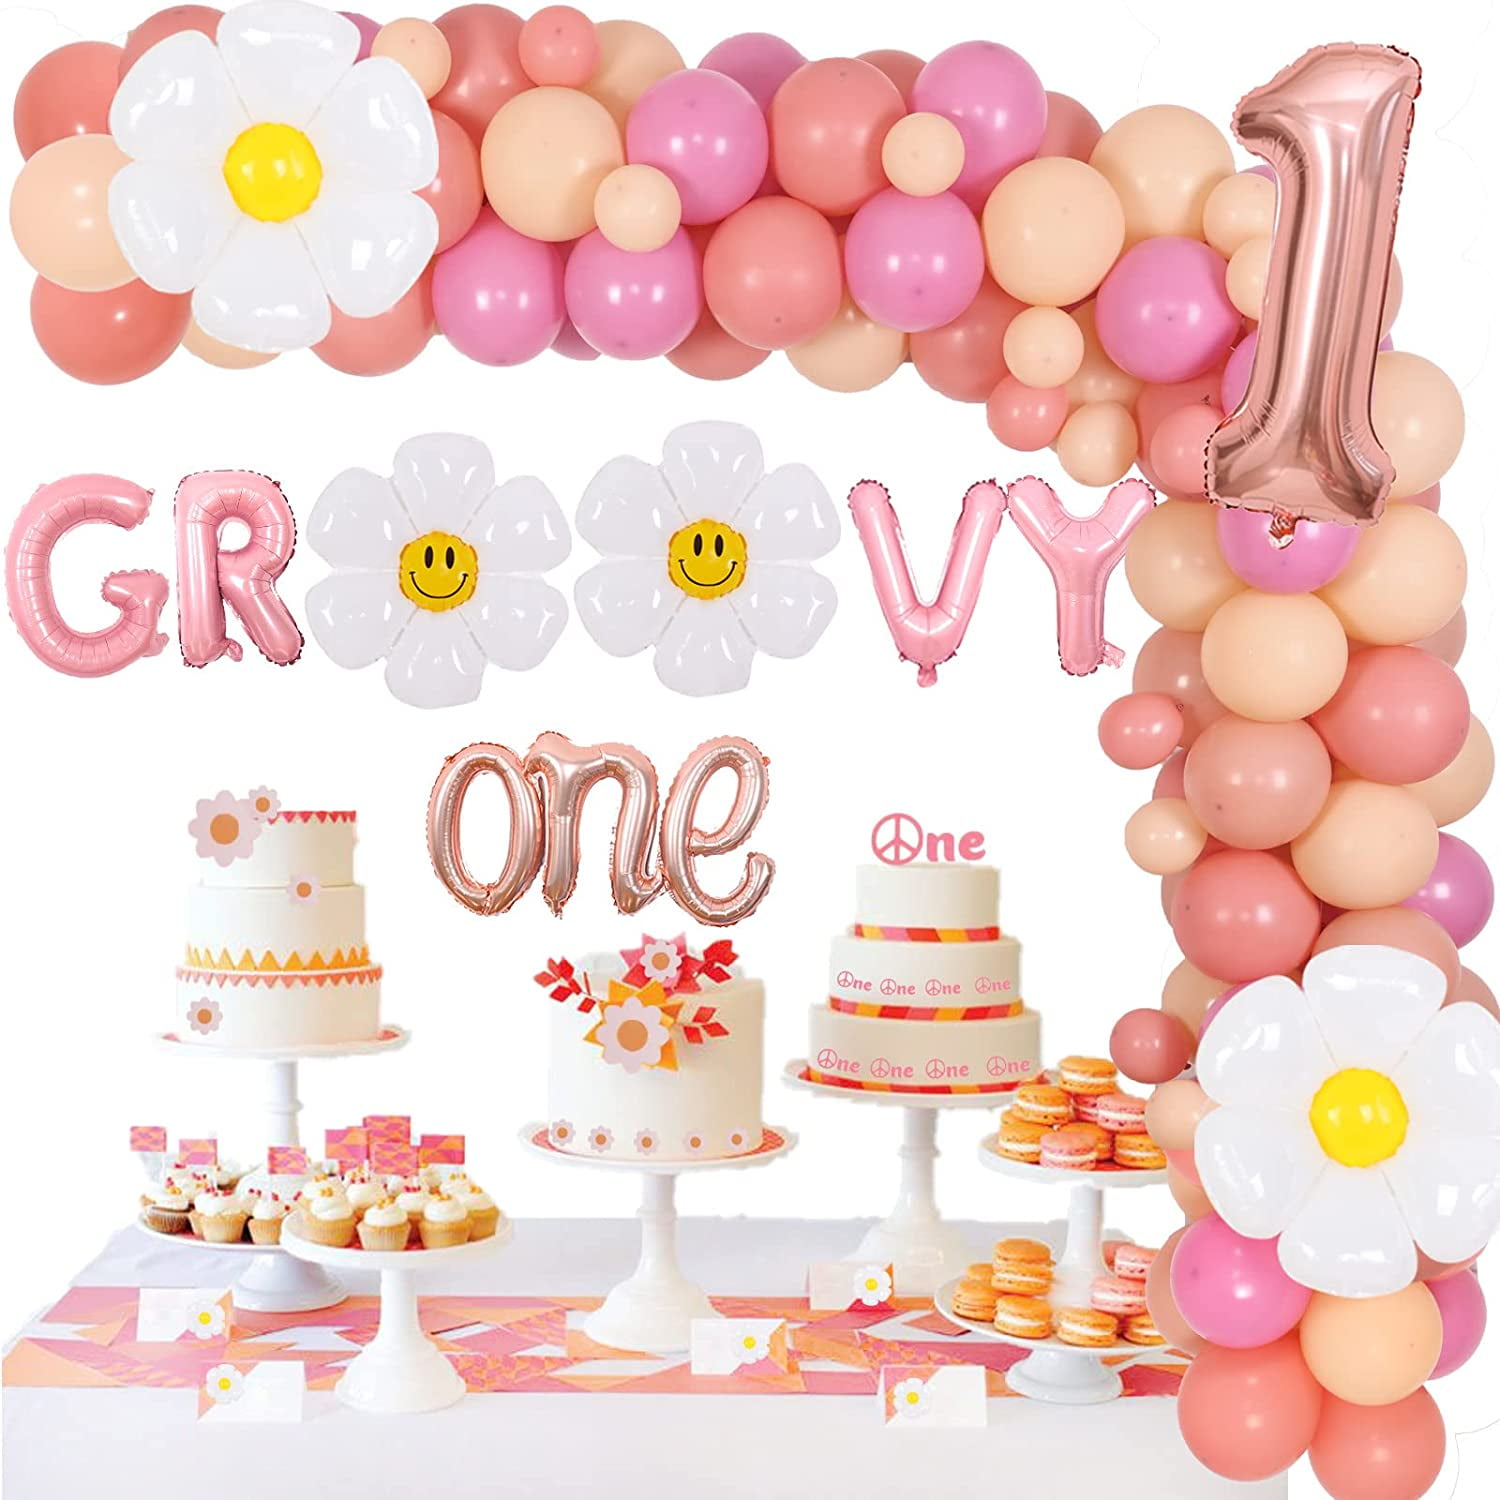 Groovy One First Birthday Decorations, Daisy Balloon Garland Kit Pink and Apricot Boho for Girl One Year Old, Retro Hippie 1st Party Supplies - Walmart.com